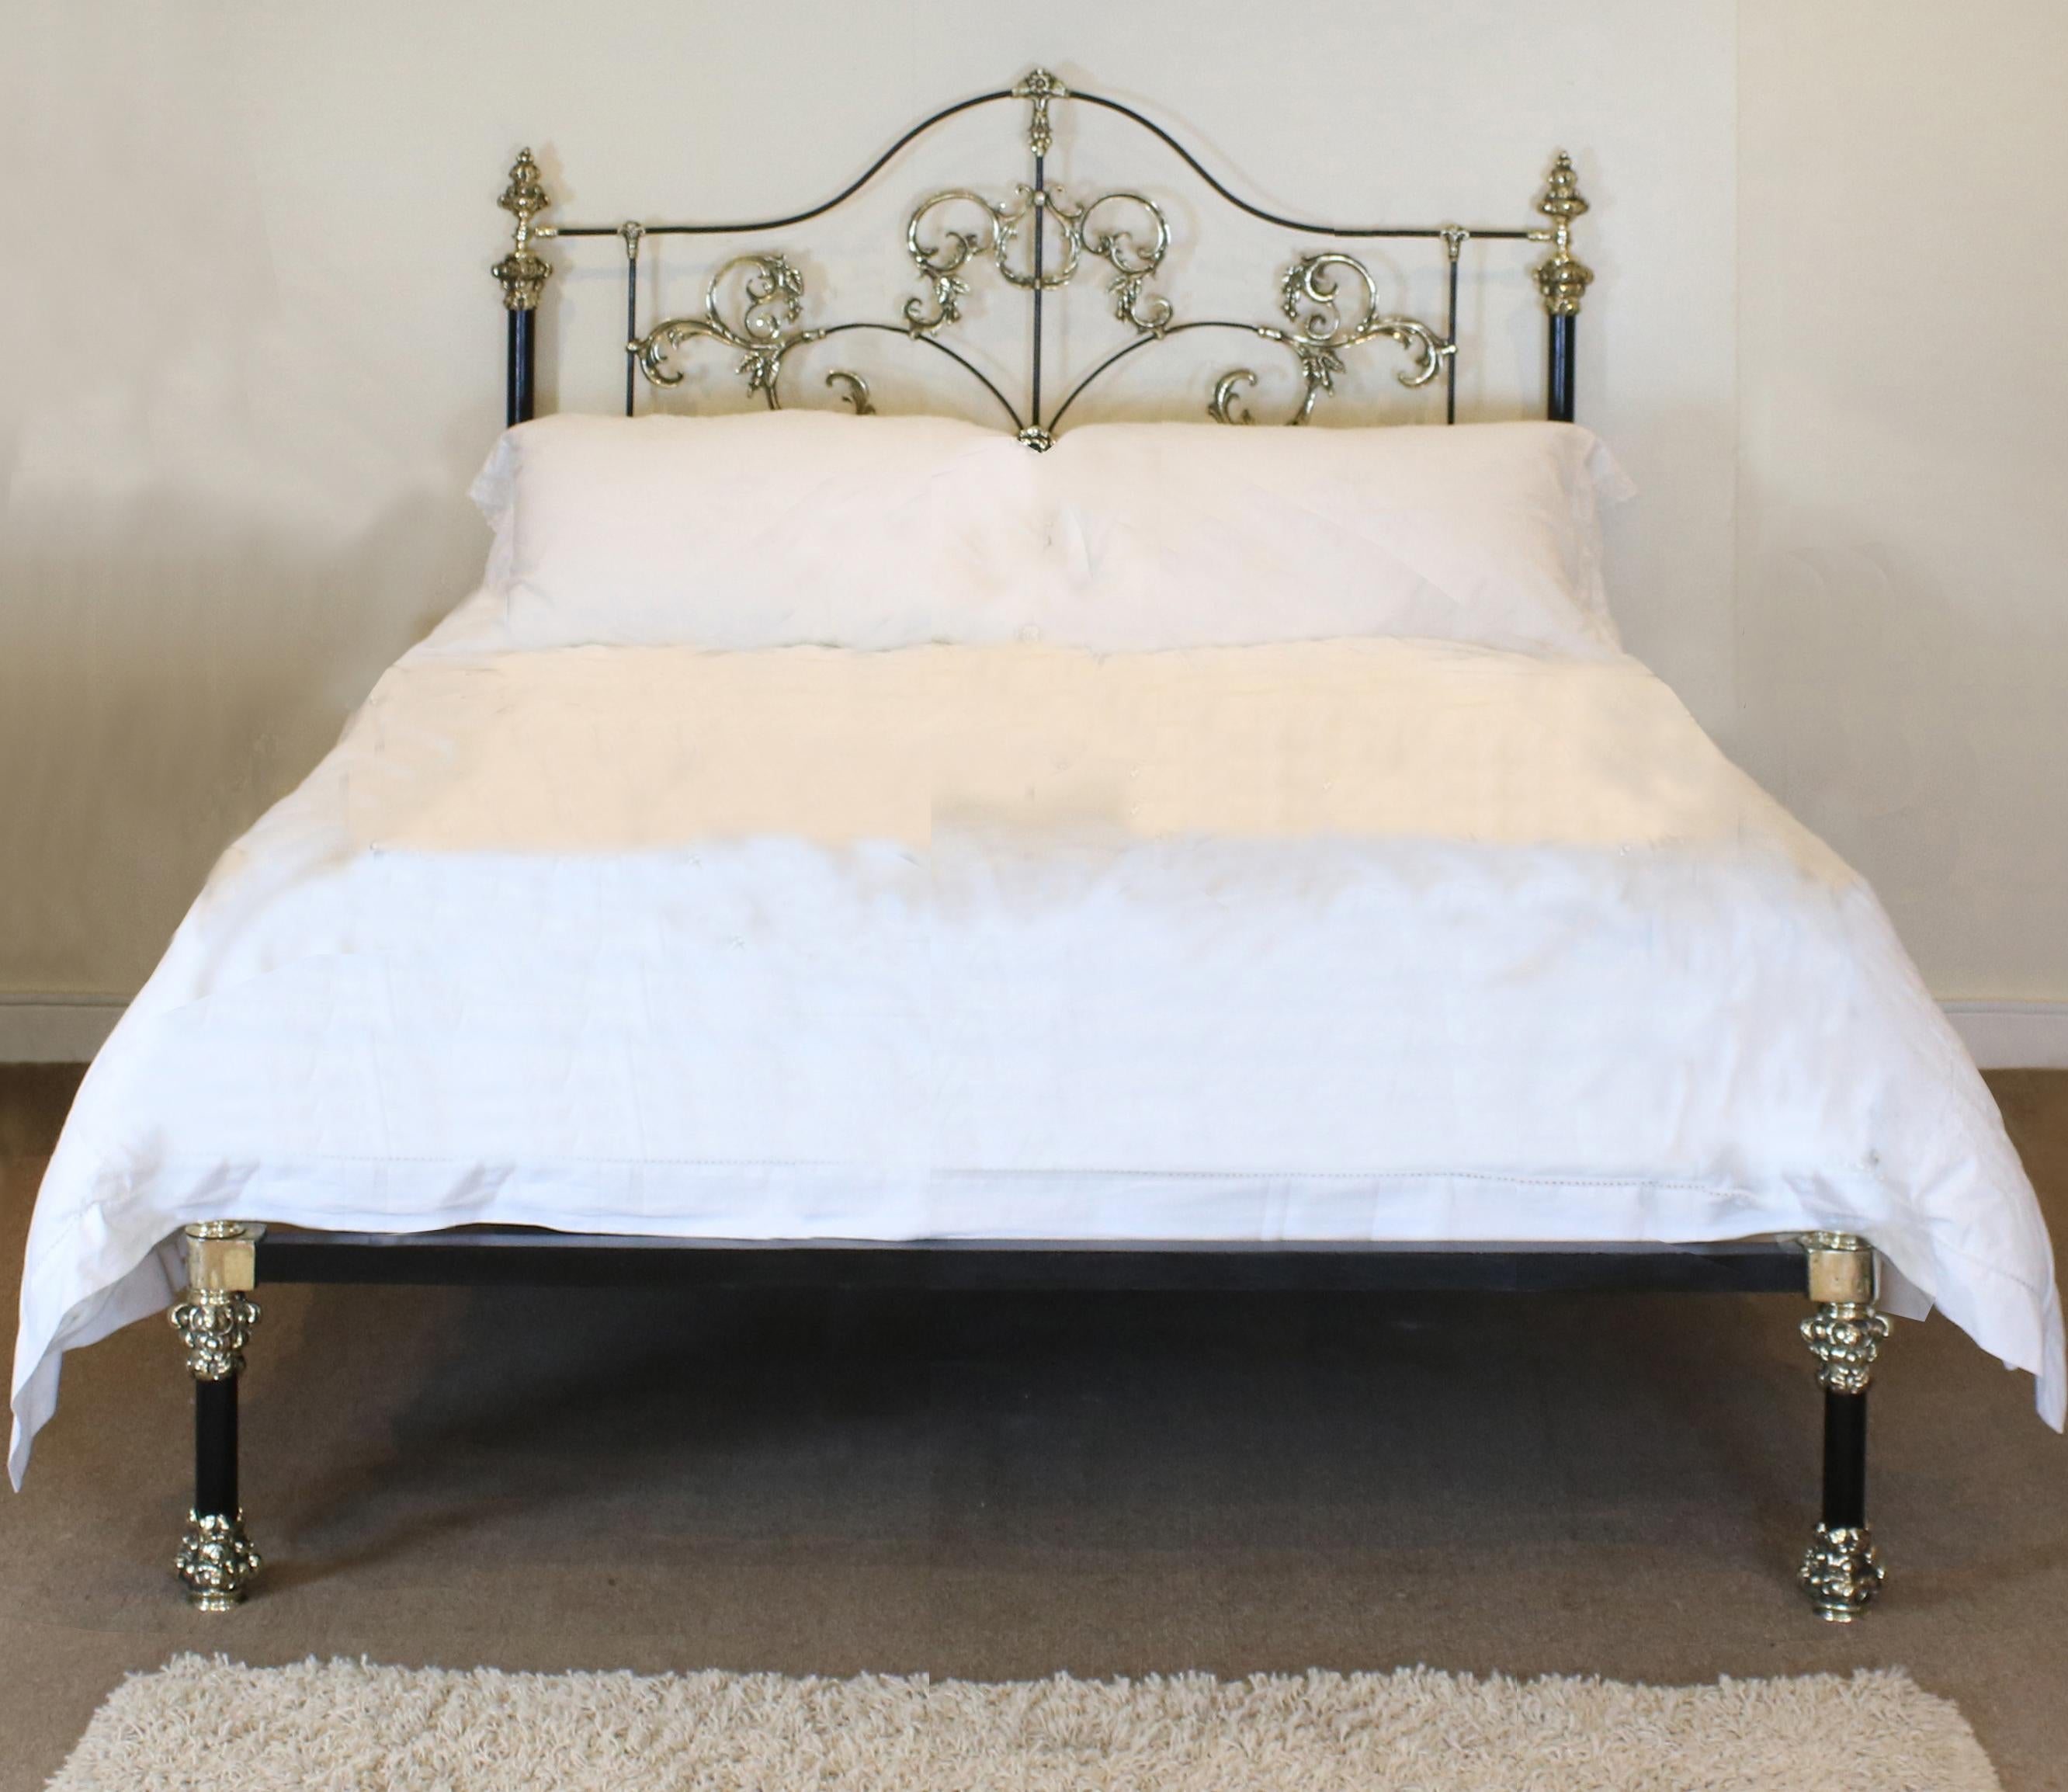 A stunning bespoke made-to-measure platform bed with decorative head panel having ornate brass castings, and low foot footboard with decorative feet.

The dimensions of this bed is European King Size to accept a 63 inches wide by 79 inches long box